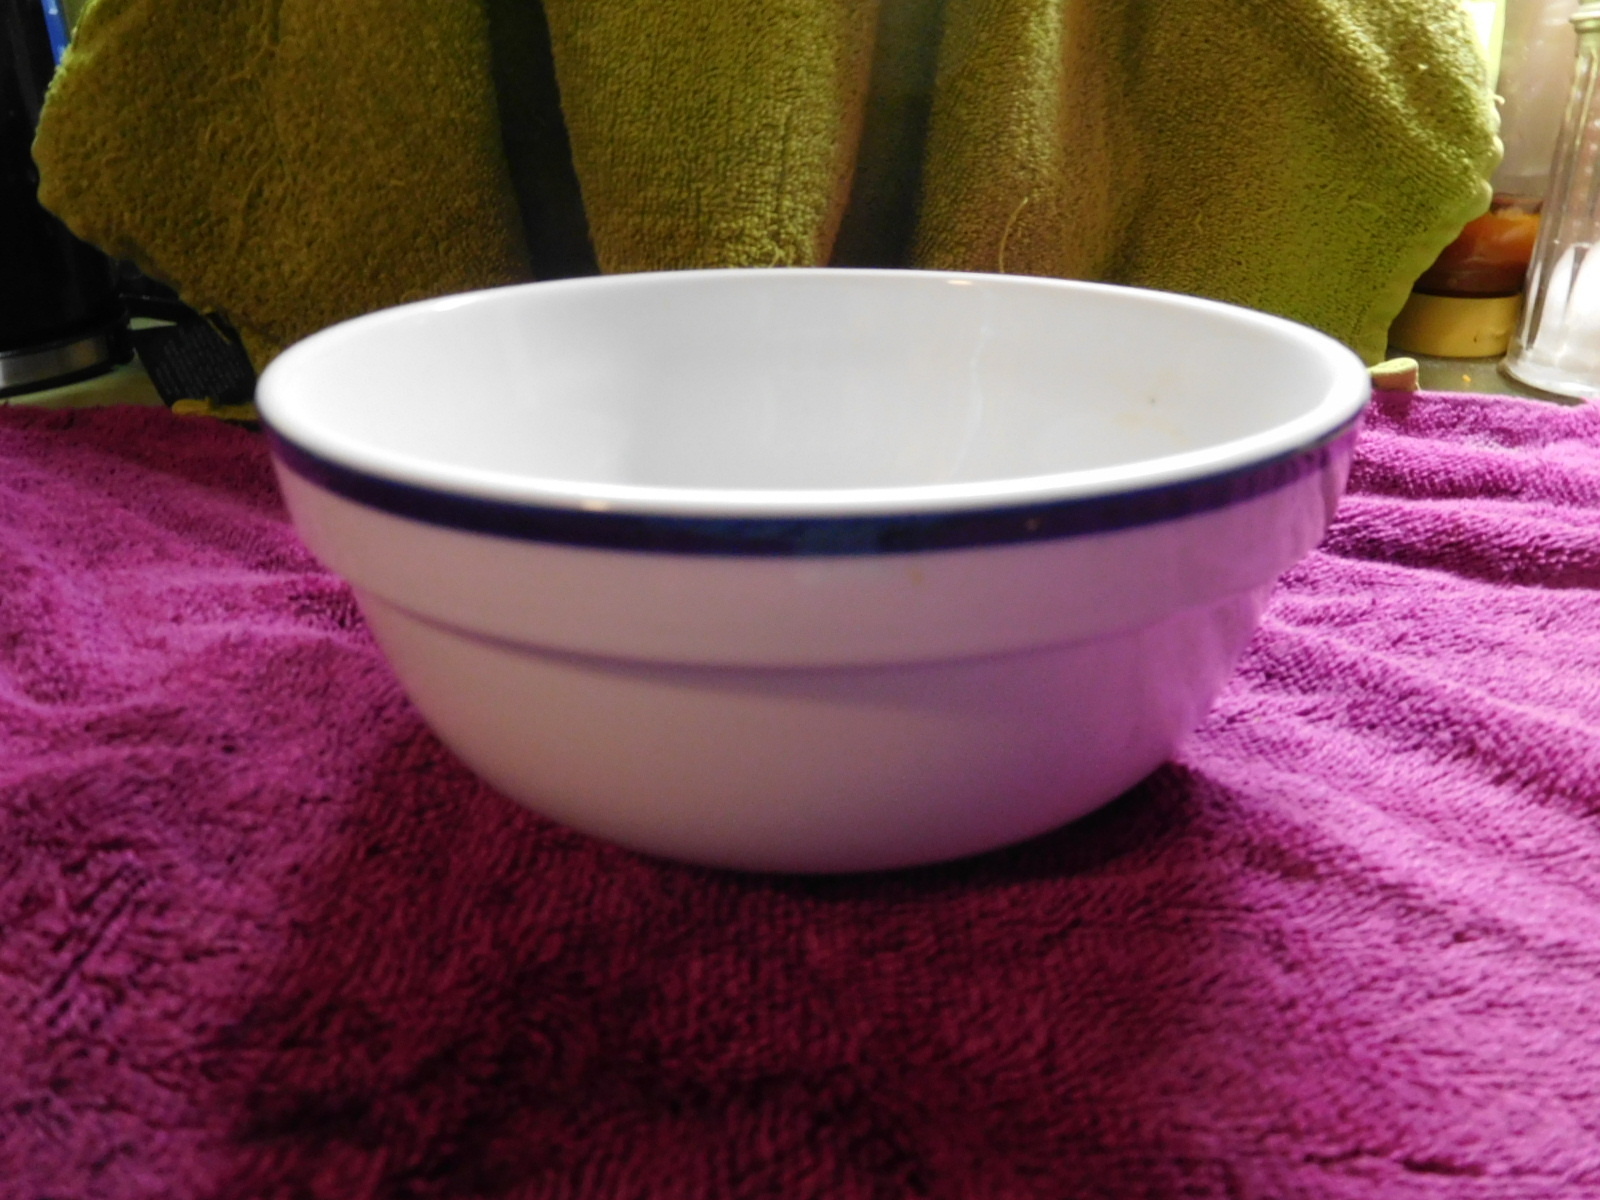  Have one to sell? Sell now Toms diner BLUE by Oneida cereal bowl 6" Nappy - $38.00